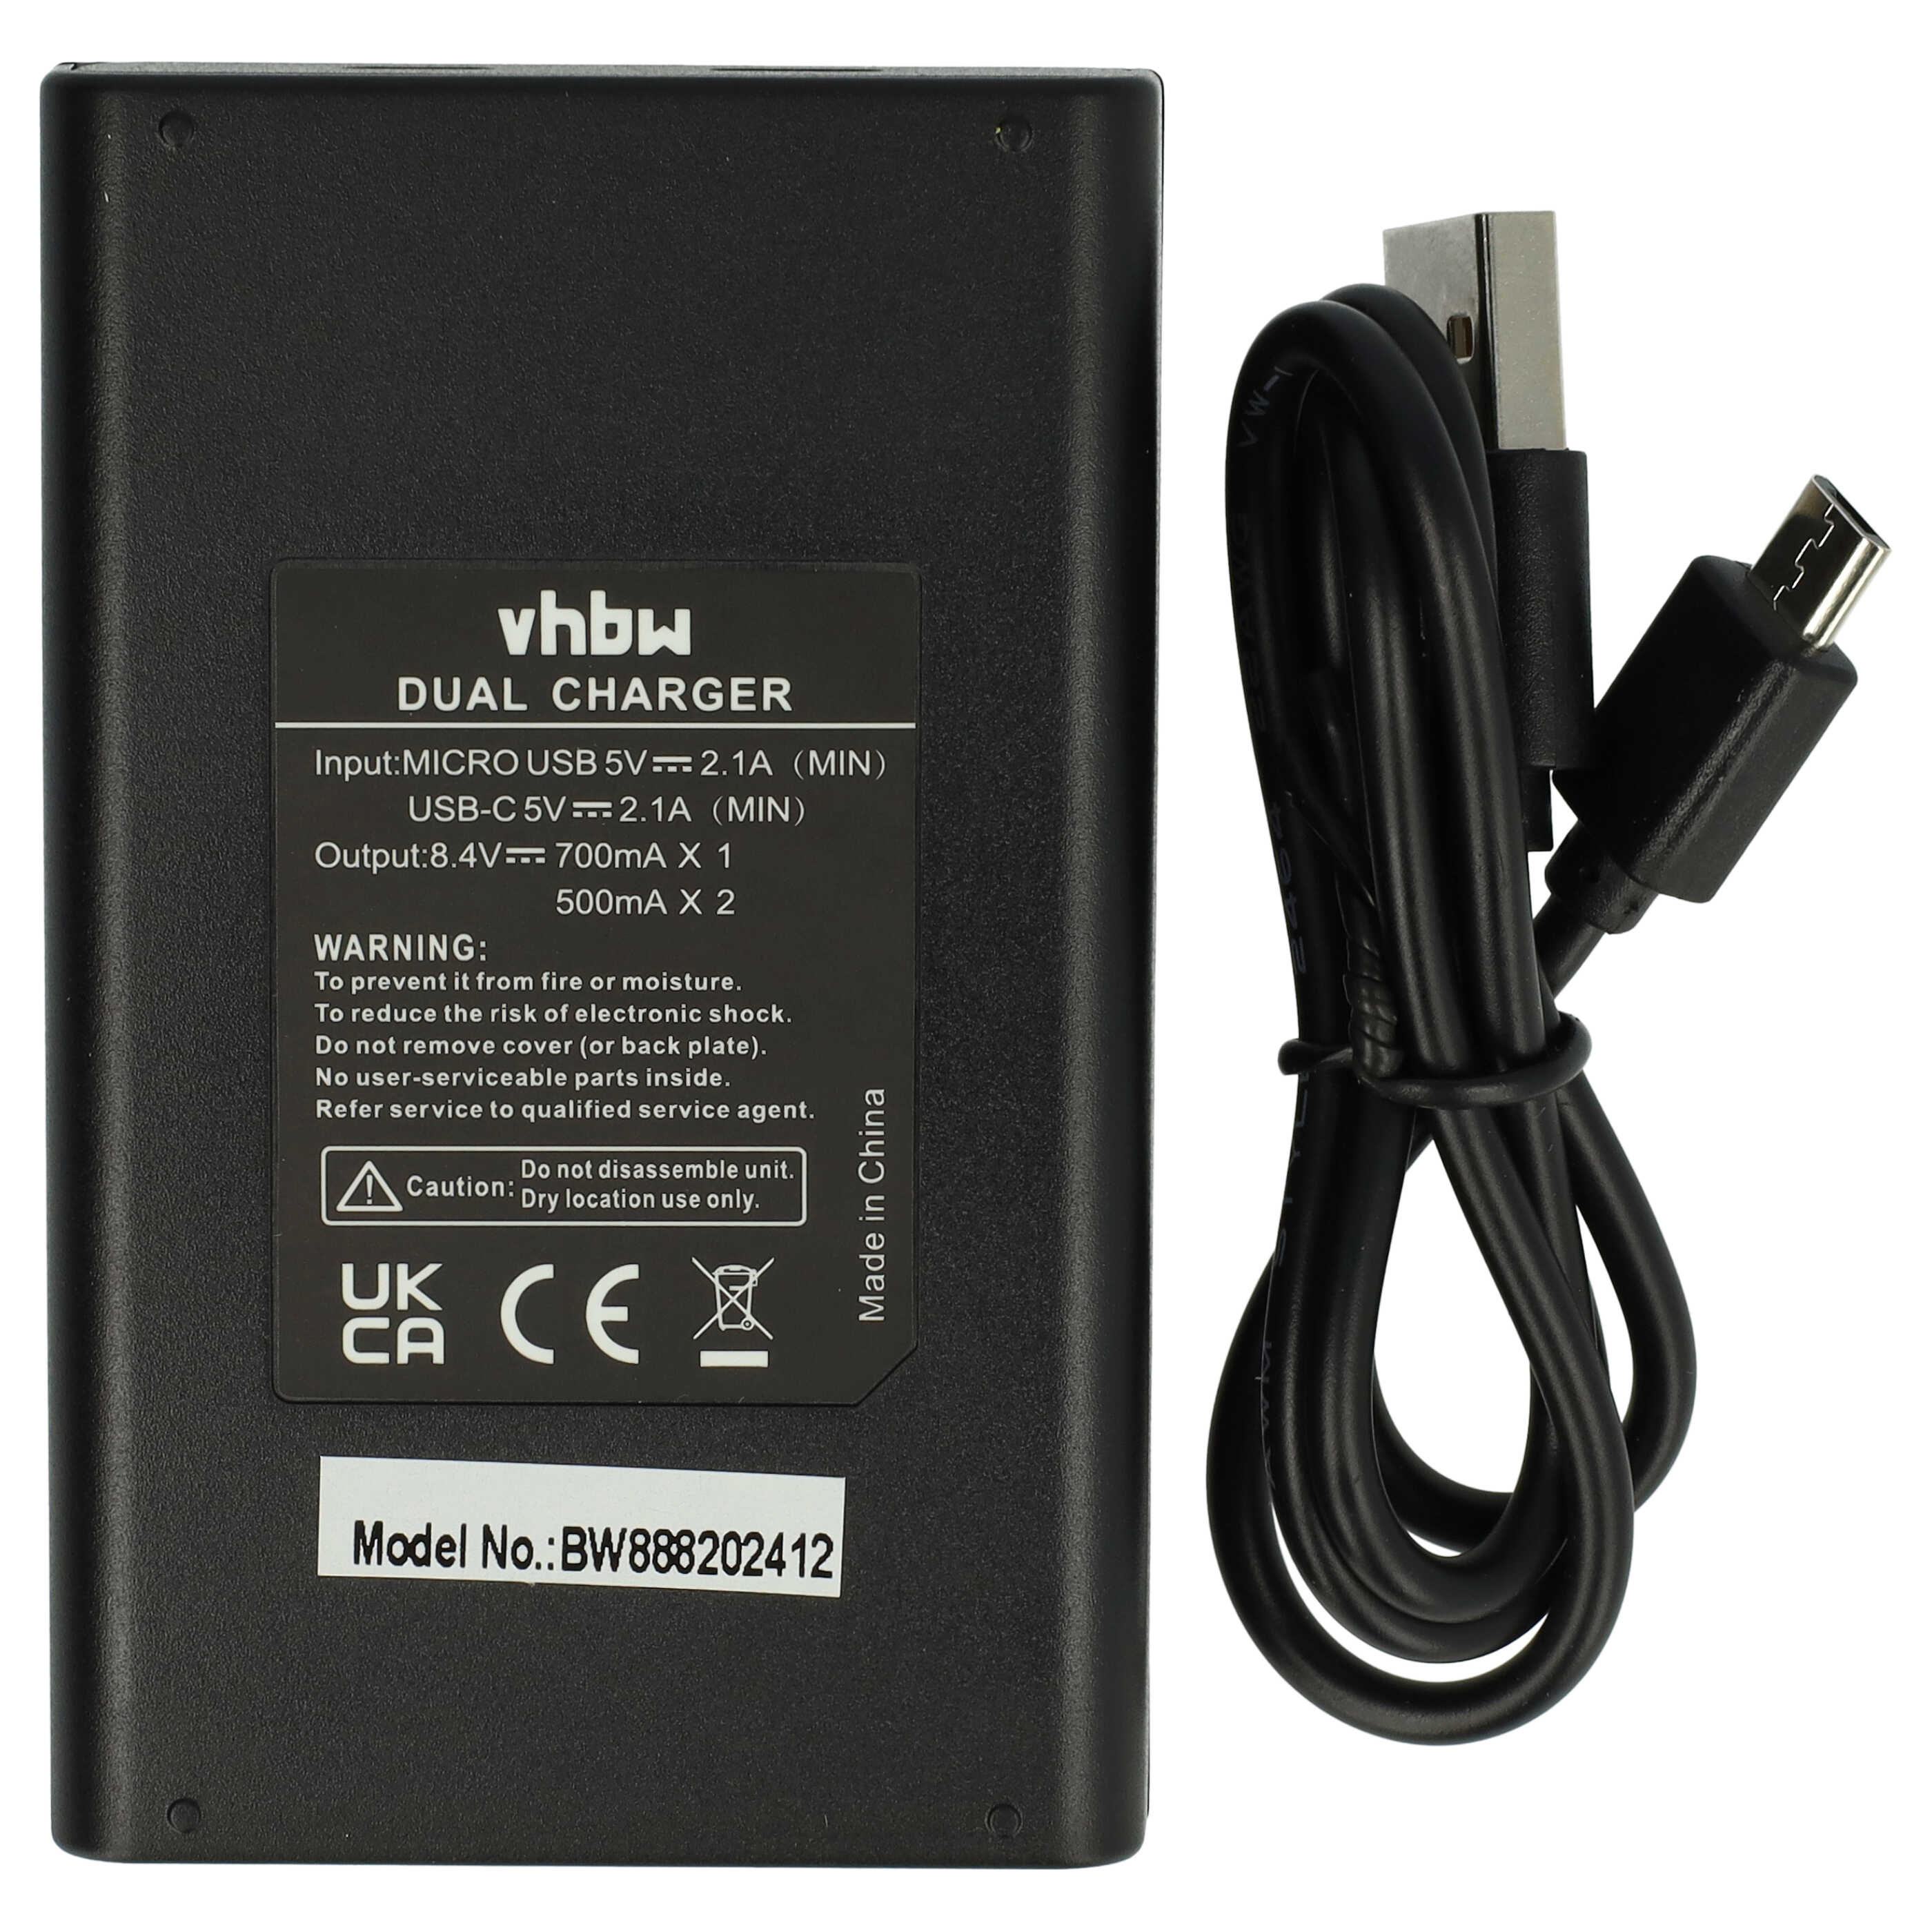 Battery Charger suitable for Leica Digital Camera - 0.5 A, 8.4 V